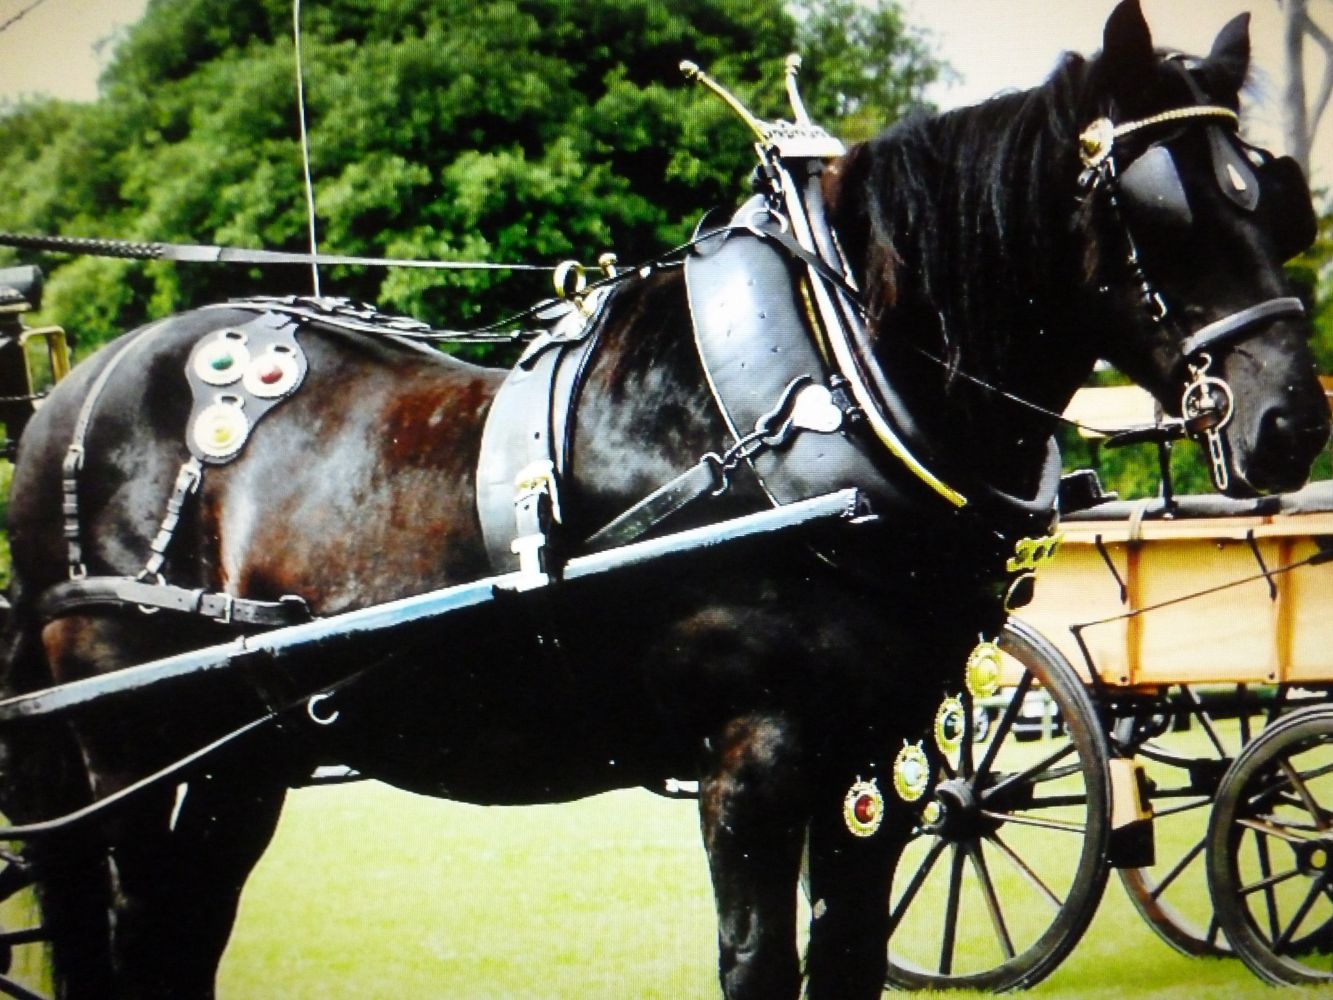 Horse-Drawn Vehicles, Saddlery and Tack, Harness, Sundry Accoutrements, Equestrian Pictures, Models & Books